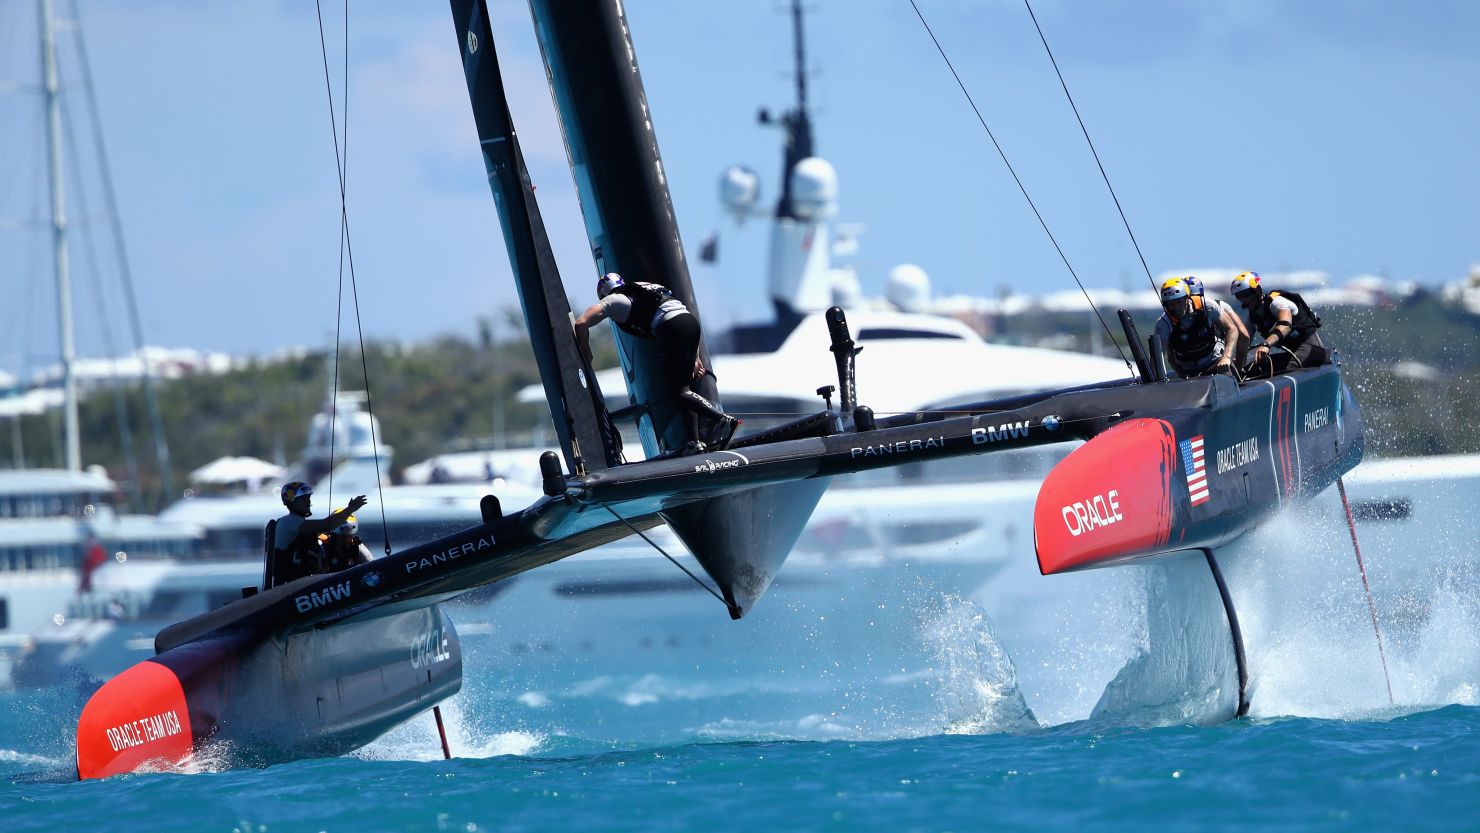 The new SailGP circuit will feature high-speed multihulls similar to those raced in the 2017 America's Cup. 